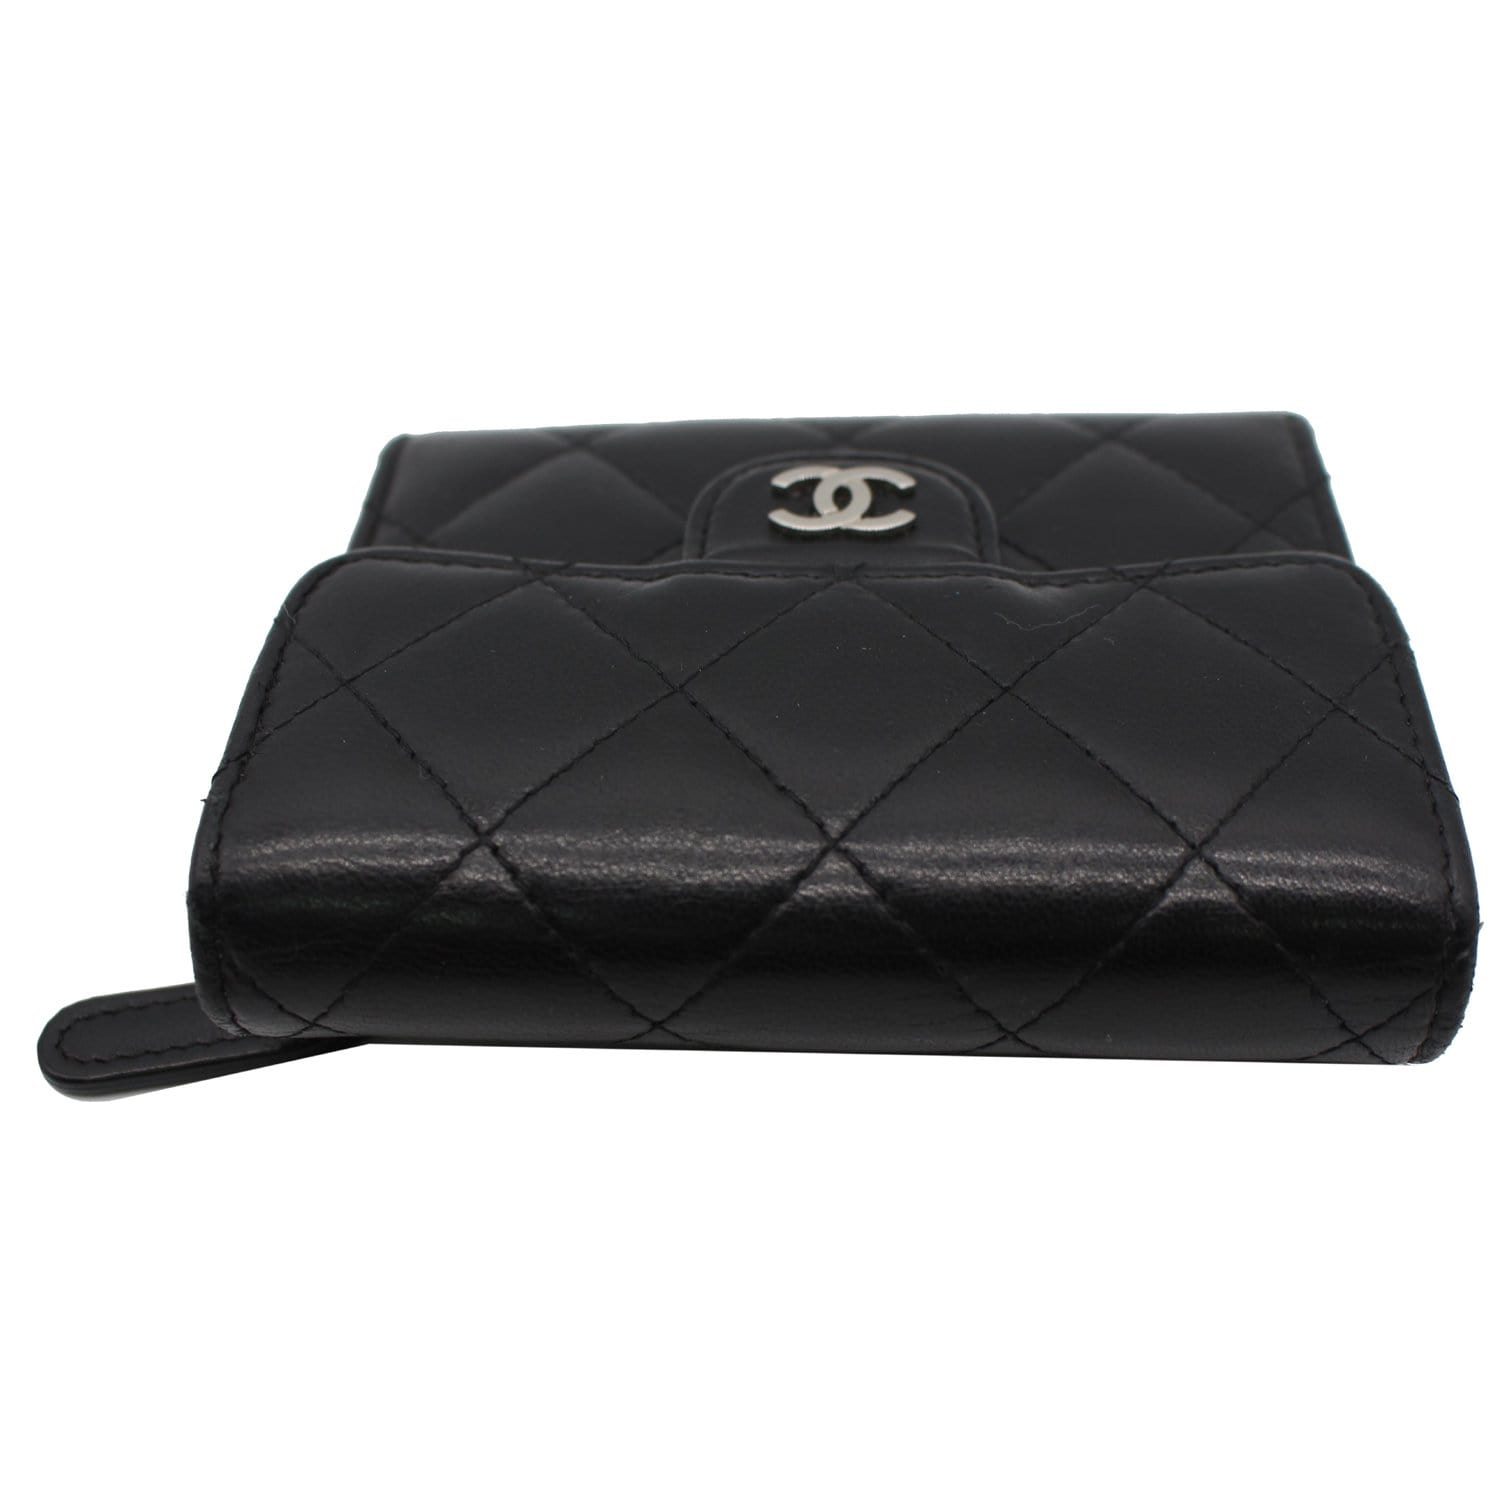 Chanel Black Quilted Leather Classic CC Trifold Wallet Chanel